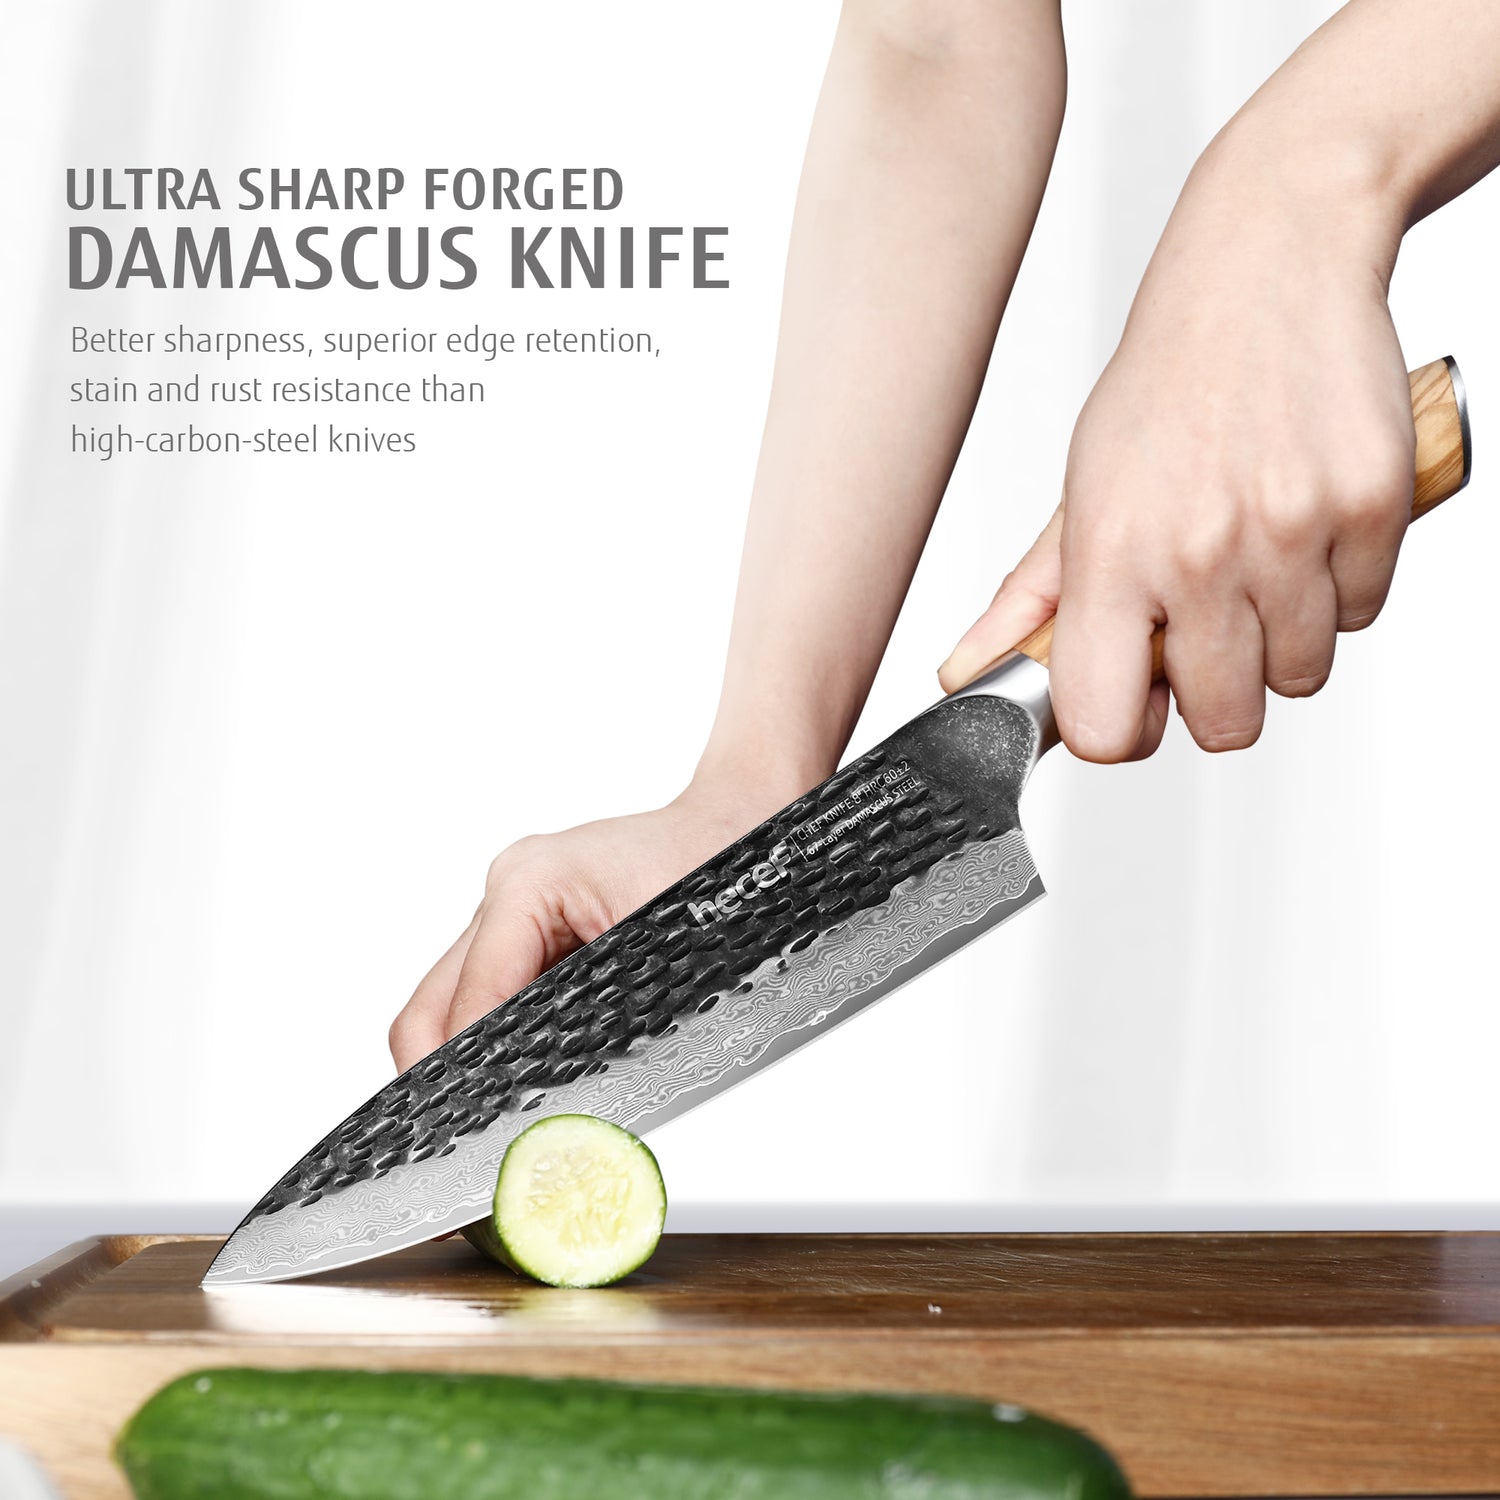 8" Professional Damascus Ultra Sharp Japanese Chef Knife with Ergonomic Olive Wood Handle, High Carbon Stainless Steel Kitchen Cooking Knife, Elegant Gift Box - Hecef Kitchen